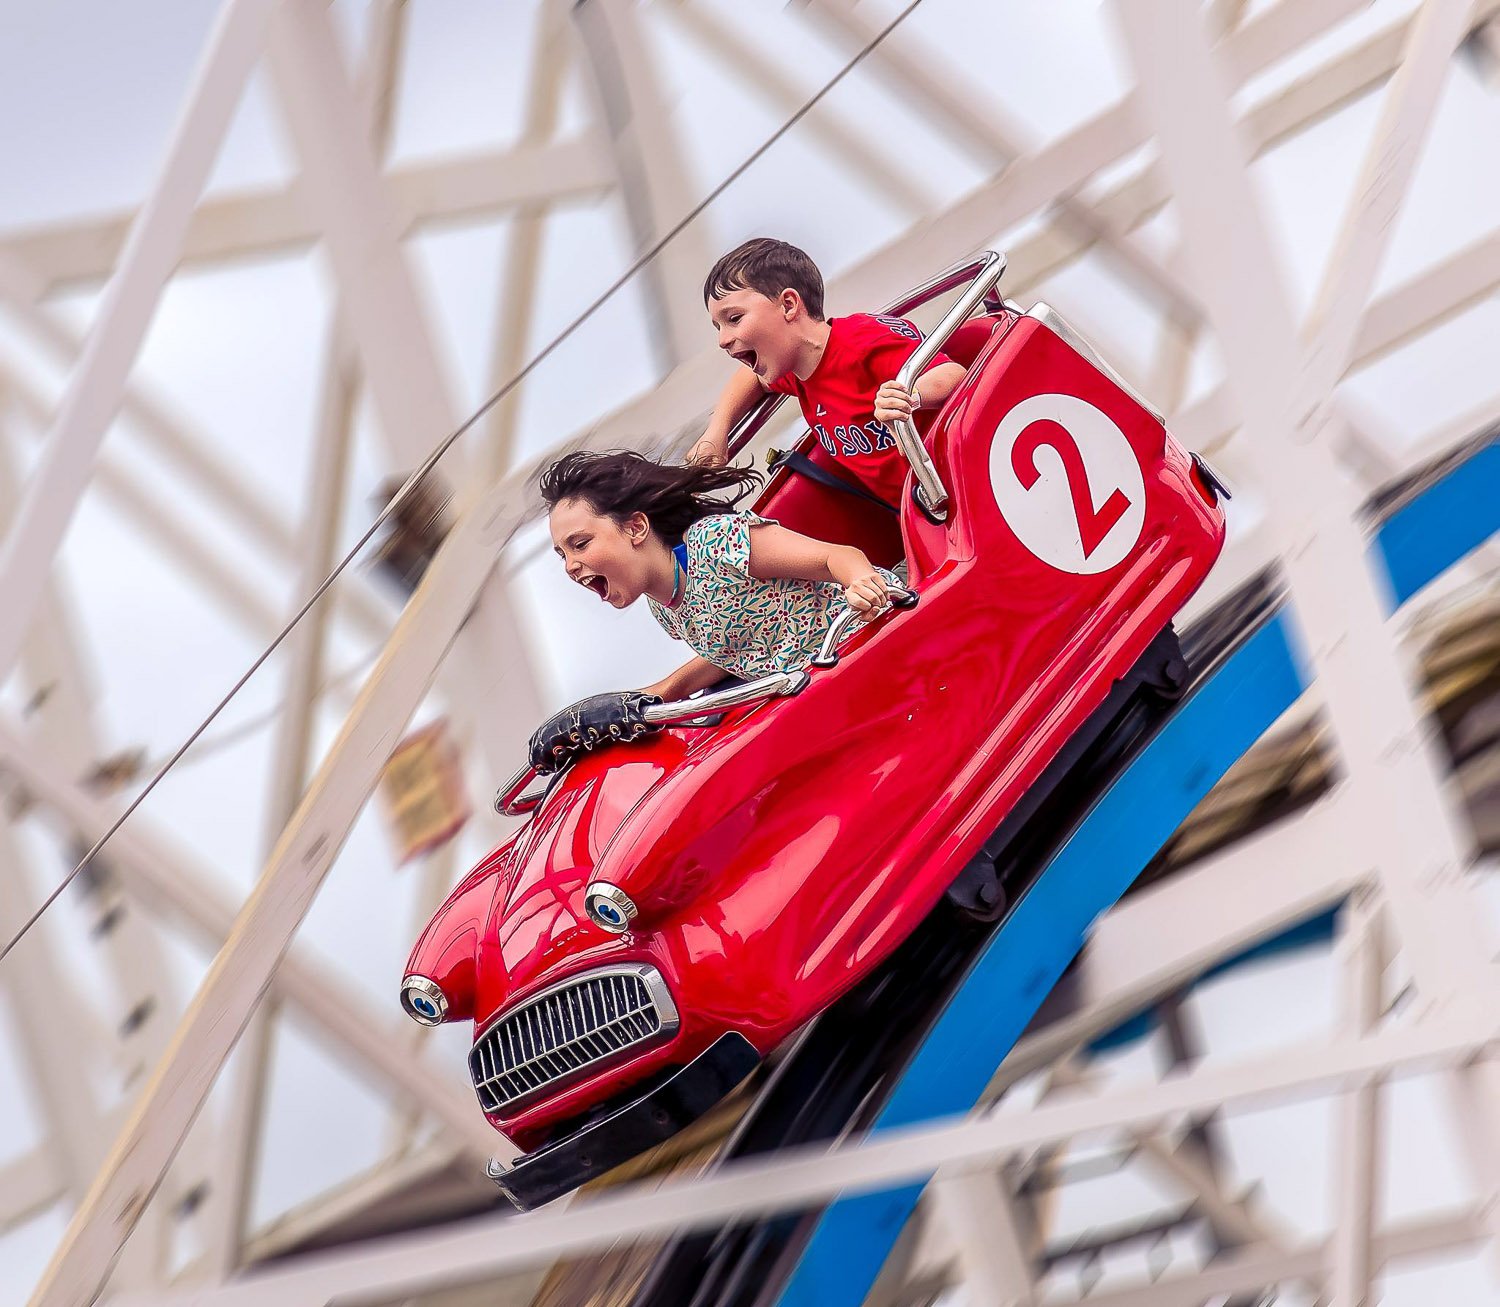 A boy and girl in a red roller-coaster car